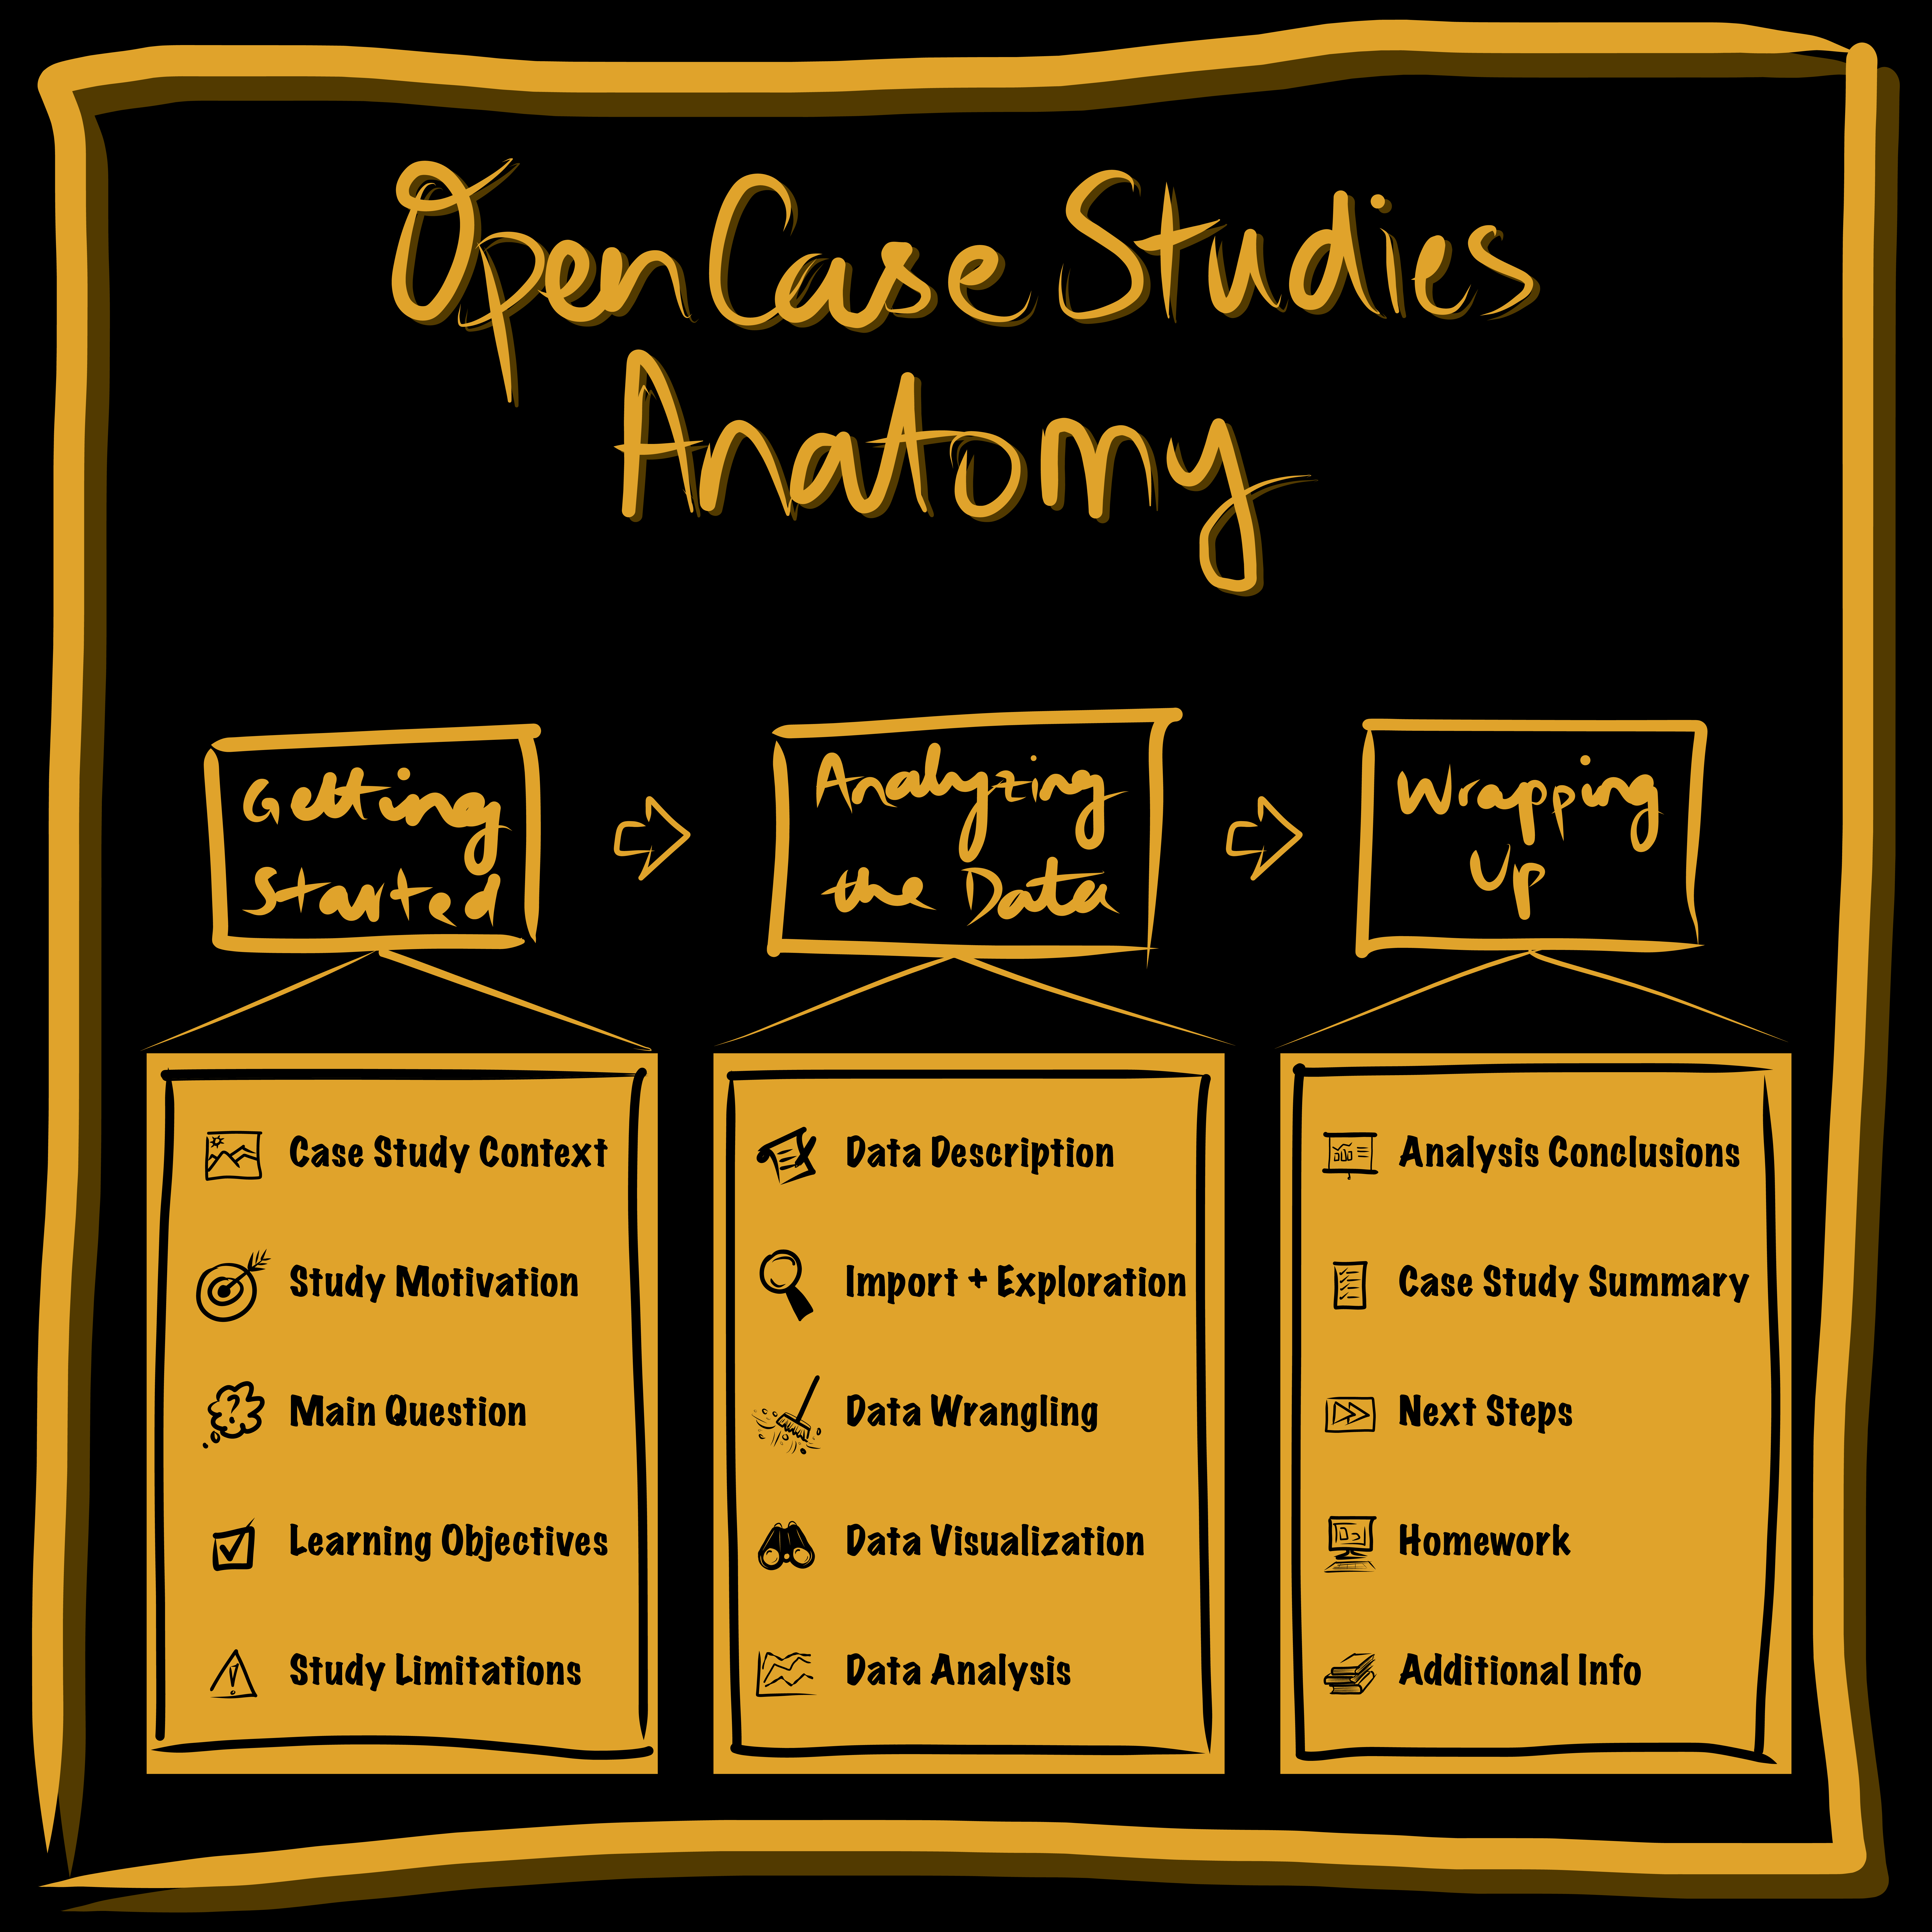 Illustration of Open Case Studies anatomy, where there are three panels showing the components of the three main stages of a case study: Getting Started, 2. Analyzing the Data, 3. Wrapping-Up. Getting started includes case study context, study motivation, main question, learning objectives, and study limitations. Analyzing the data includes data description, import and exploration, wrangling, visualization, and analysis. Wrapping-up includes analysis conclusions, case study summary, next steps, homework, and additional information